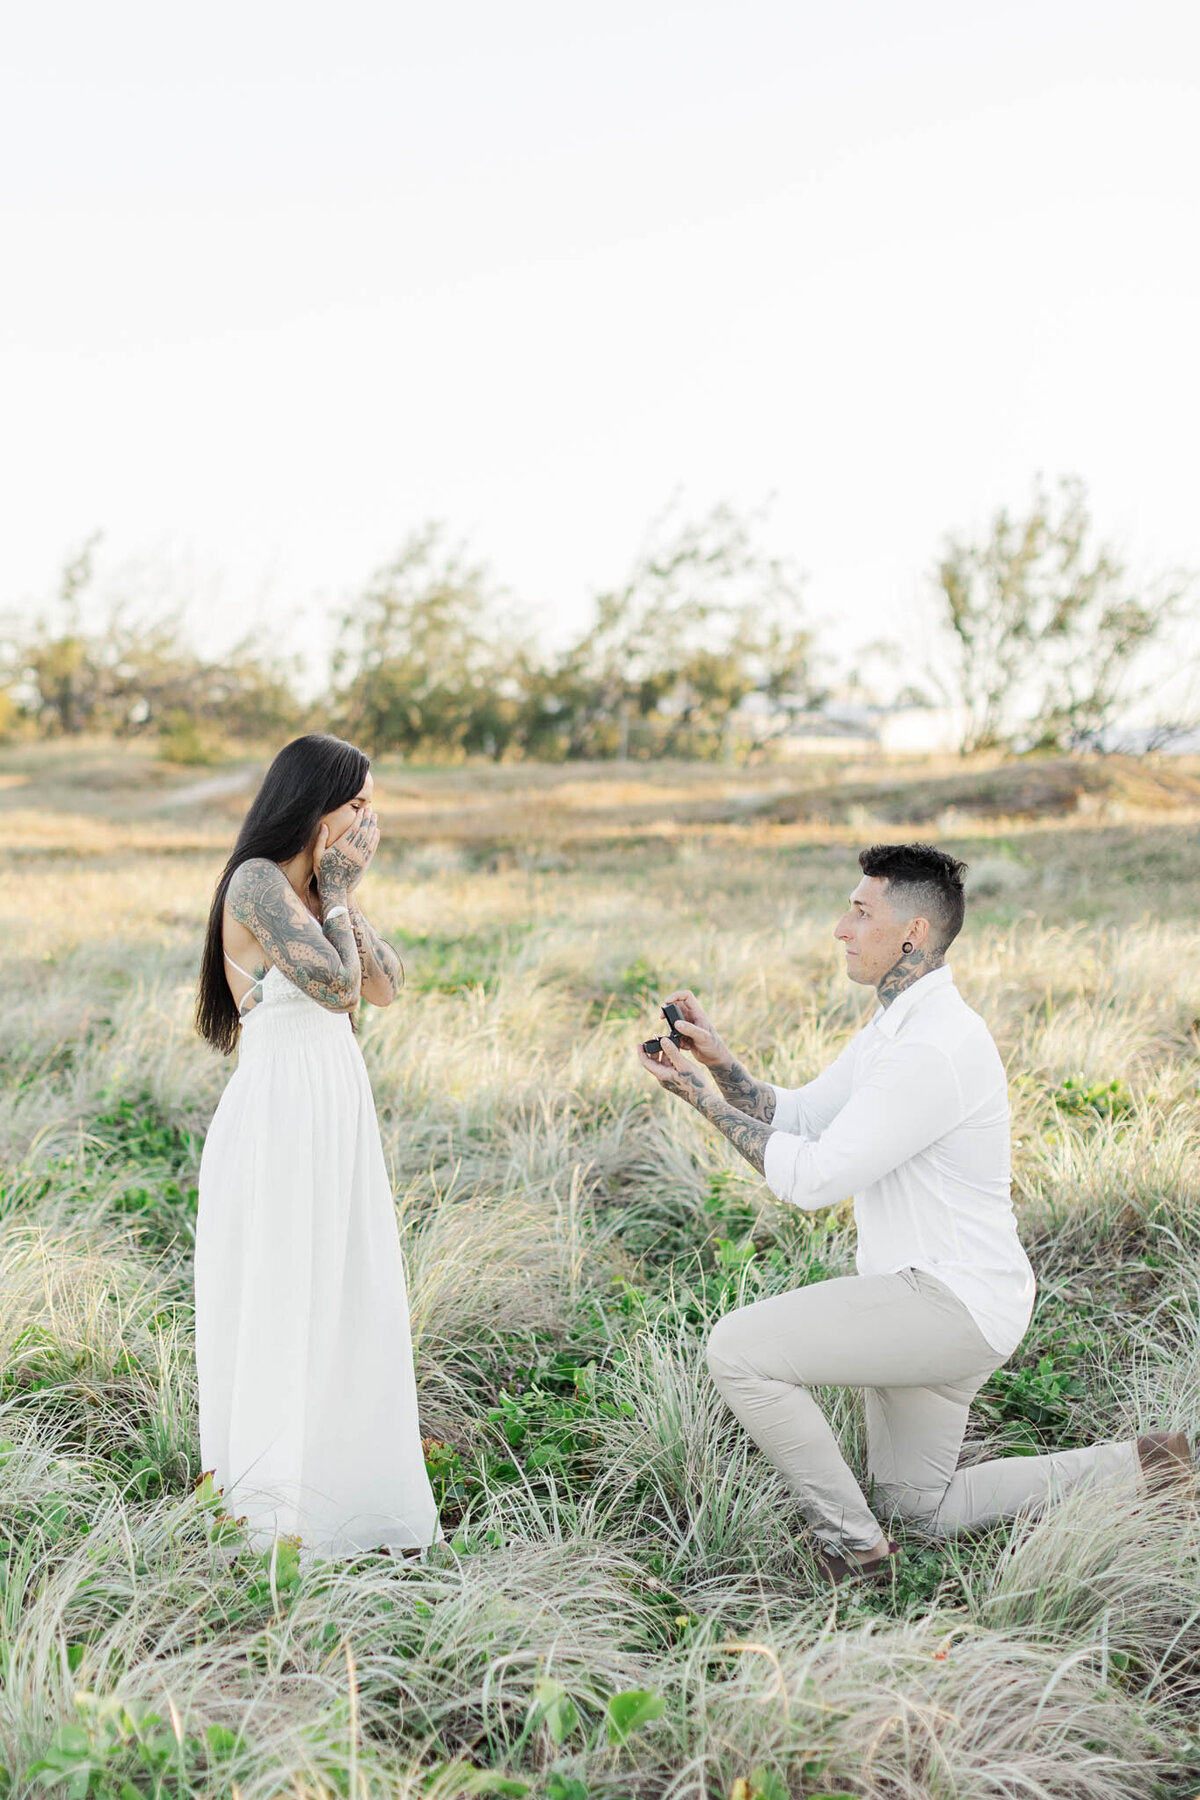 Man proposes to his partner during couple photography session